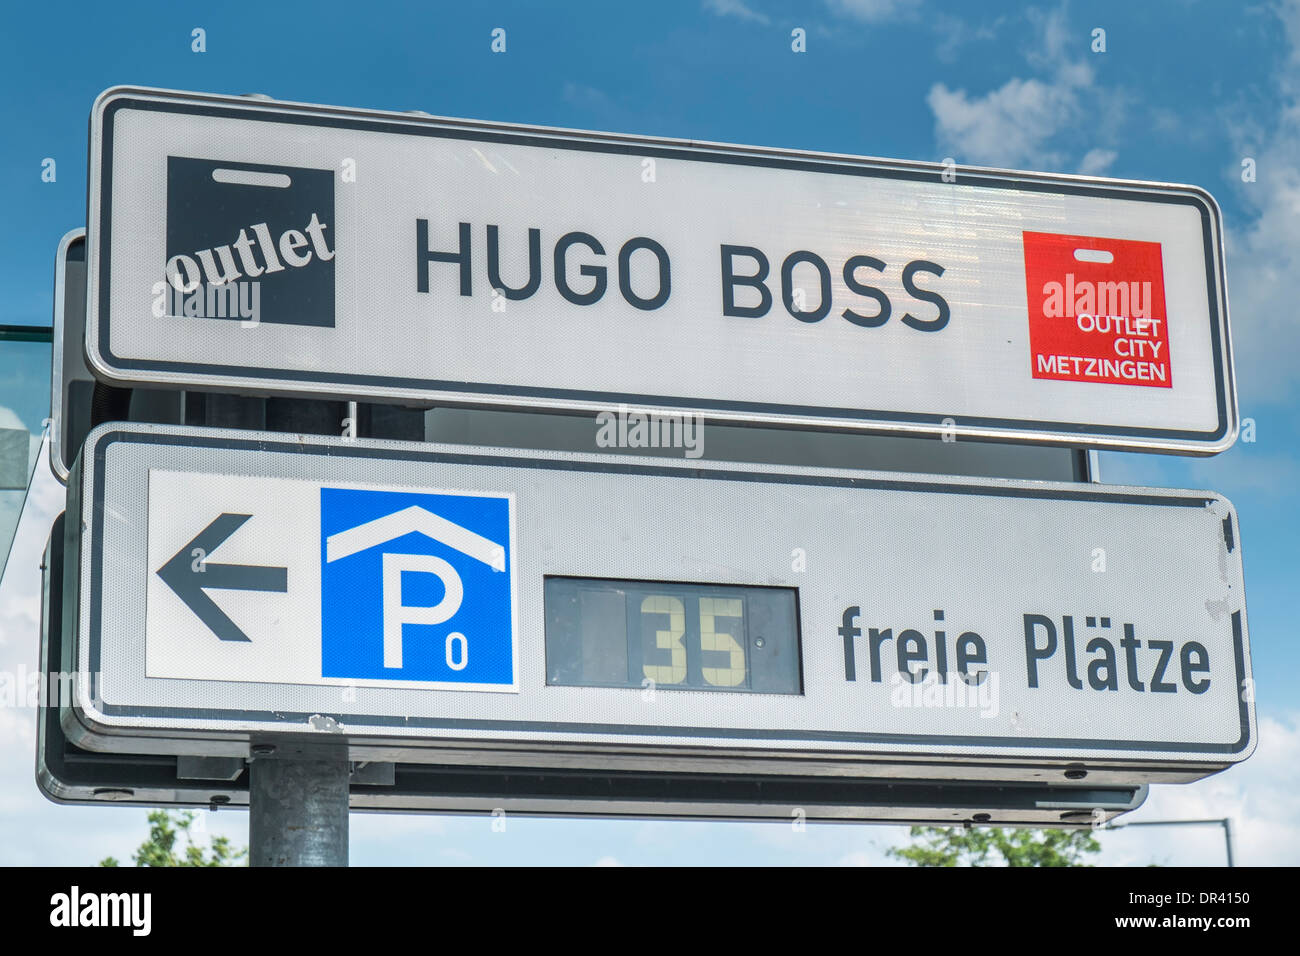 signpost parking space and the hugo boss on the premises of the outlet city, metzingen Stock Photo - Alamy